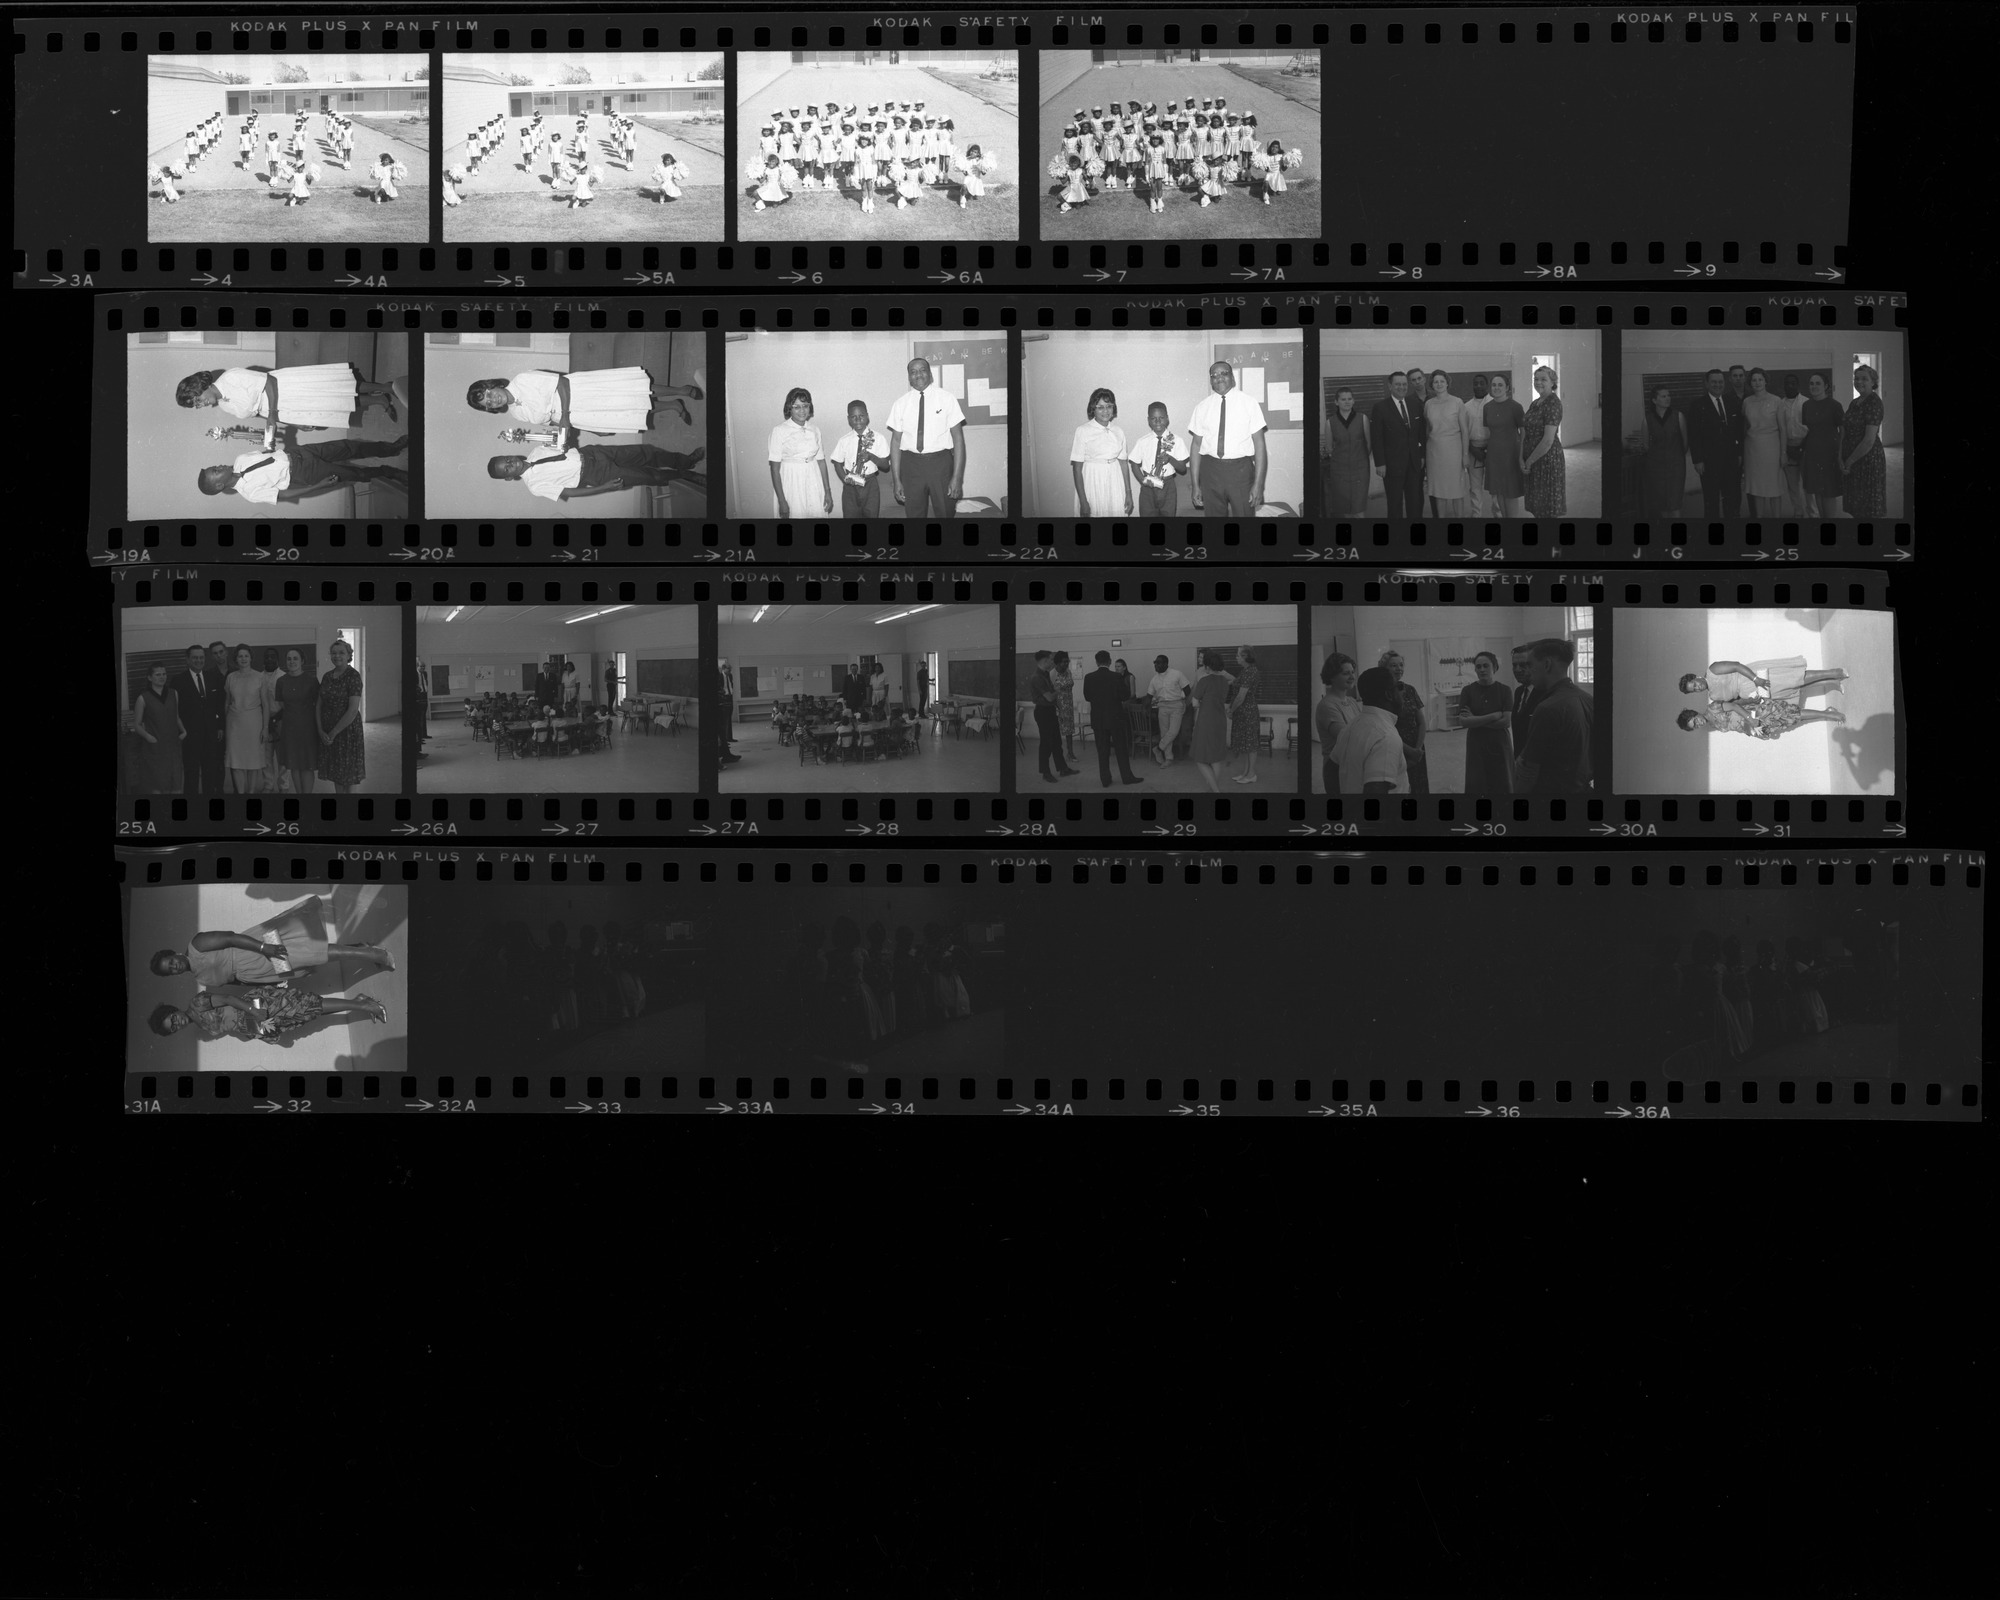 Set of negatives by Clinton Wright including groundbreaking for Teen Center, Zion Missionaries program, Mrs. Gay, Kappas and high school students, drill team, bicycle champion at Kit Carson, Senator Cannon at child care, and adult class, 1965, page 3